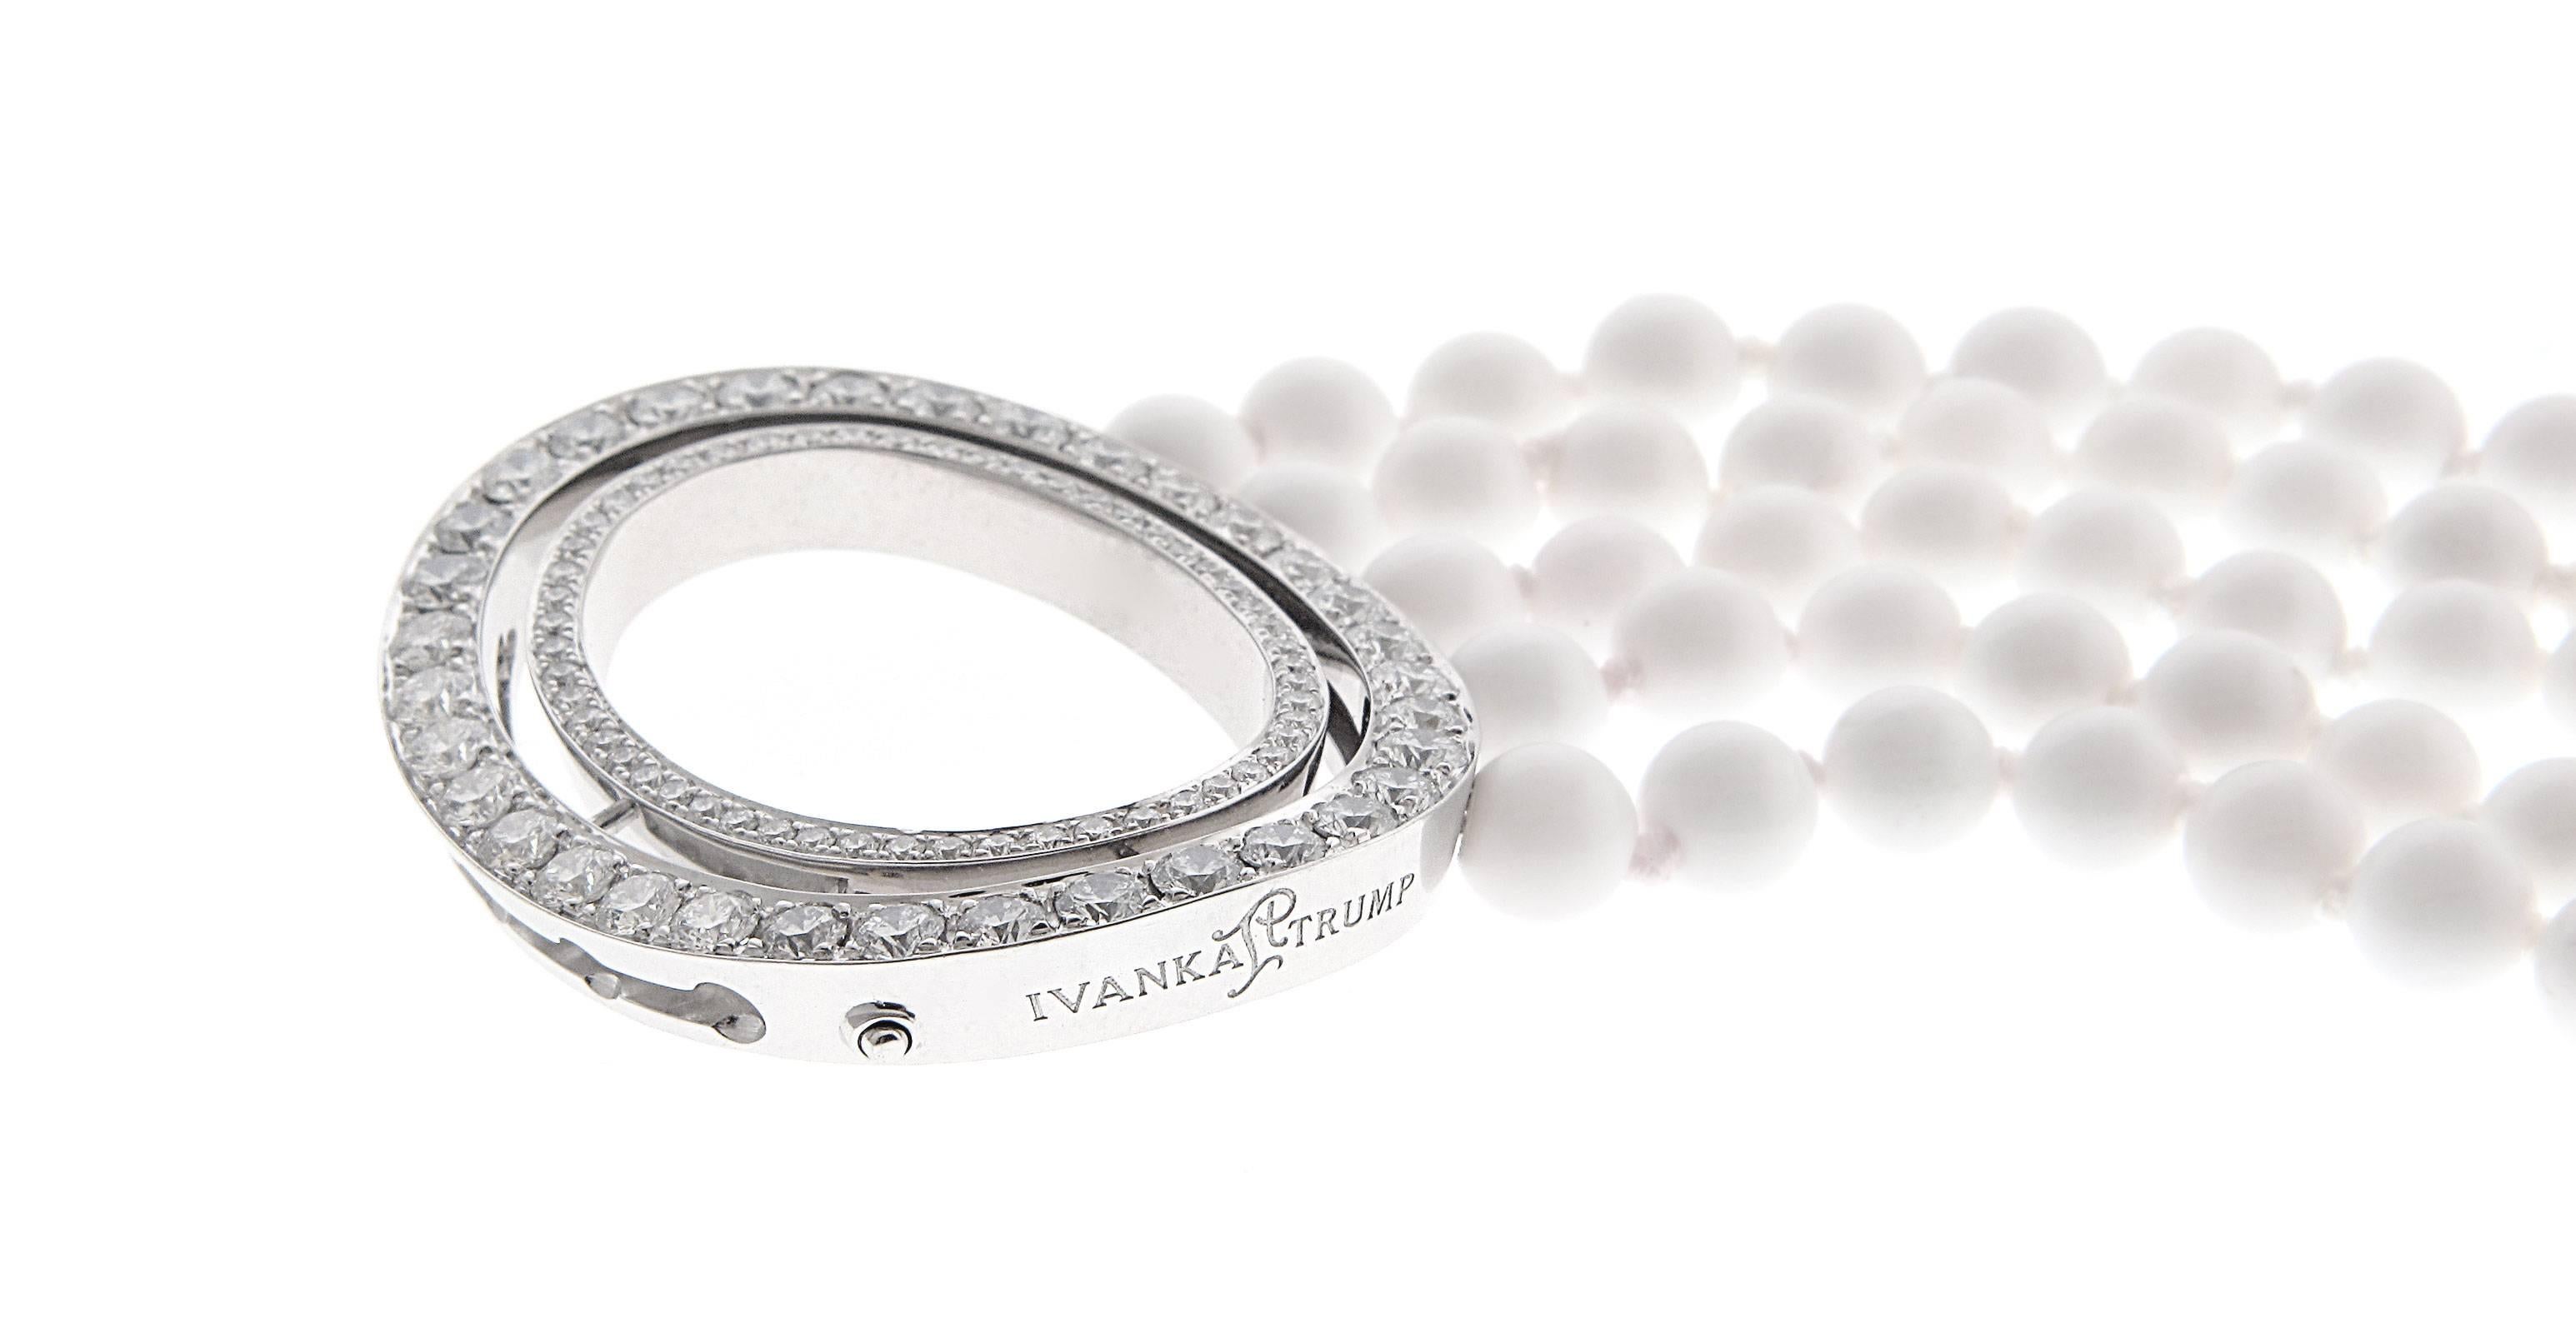 Ivanka Trump Signature Oval Collection bracelet. The bracelet is 7 inches in length, made of 18K white gold, and weighs 52.40 DWT (approx. 81.49 grams). It also has 34 G-color, VS2/-clarity diamonds weighing 5.47 CTTW, 54 G-color, VS2/-clarity